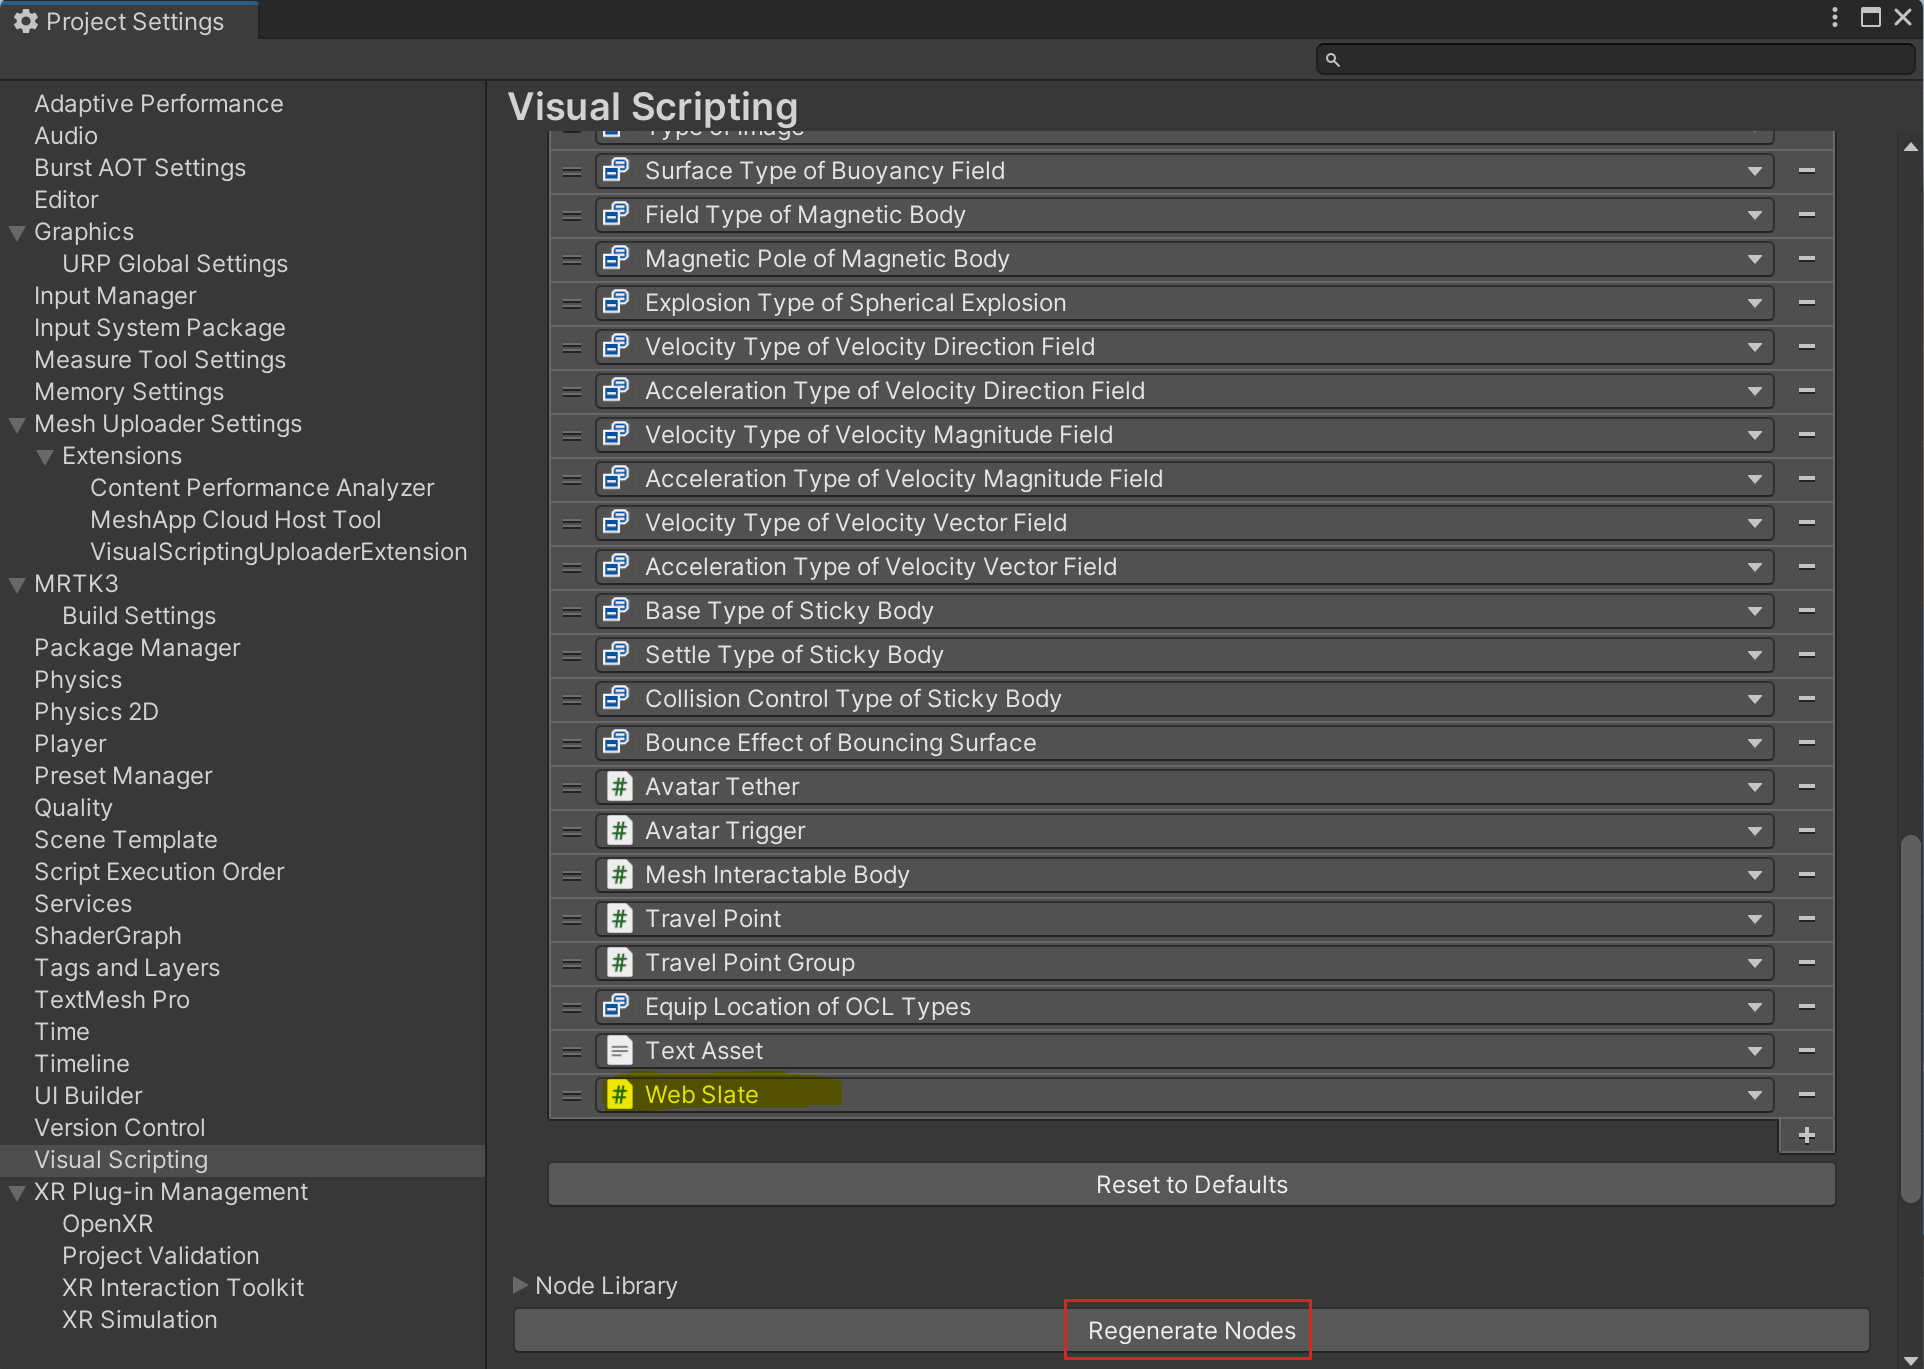 Screenshot of WebSlate from the assembly menu in Unity.